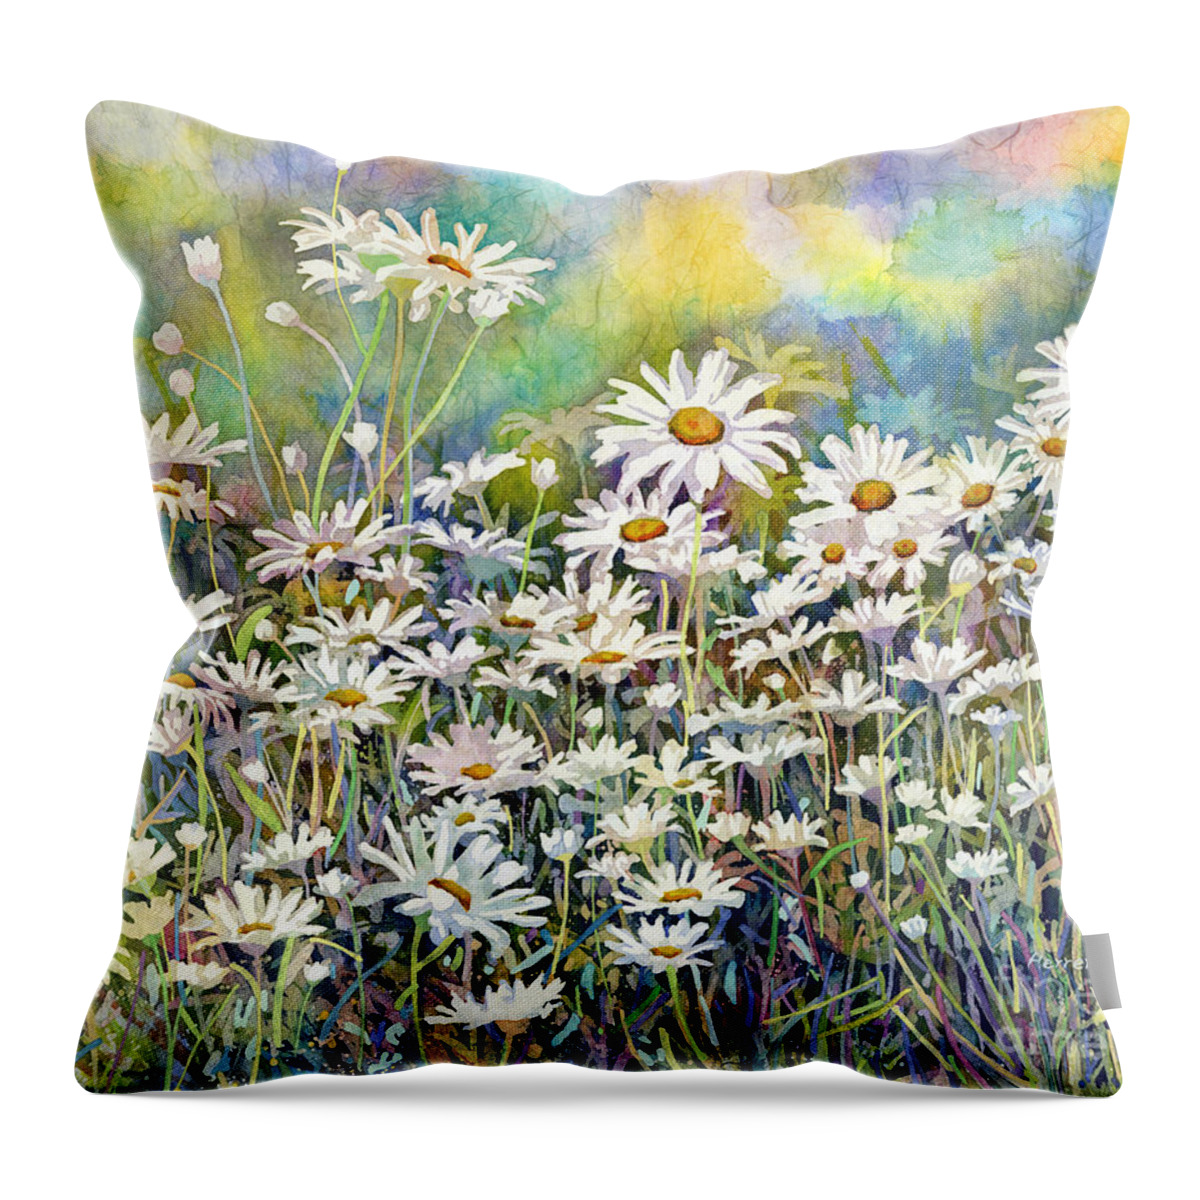 Daisy Throw Pillow featuring the painting Dreaming Daisies by Hailey E Herrera